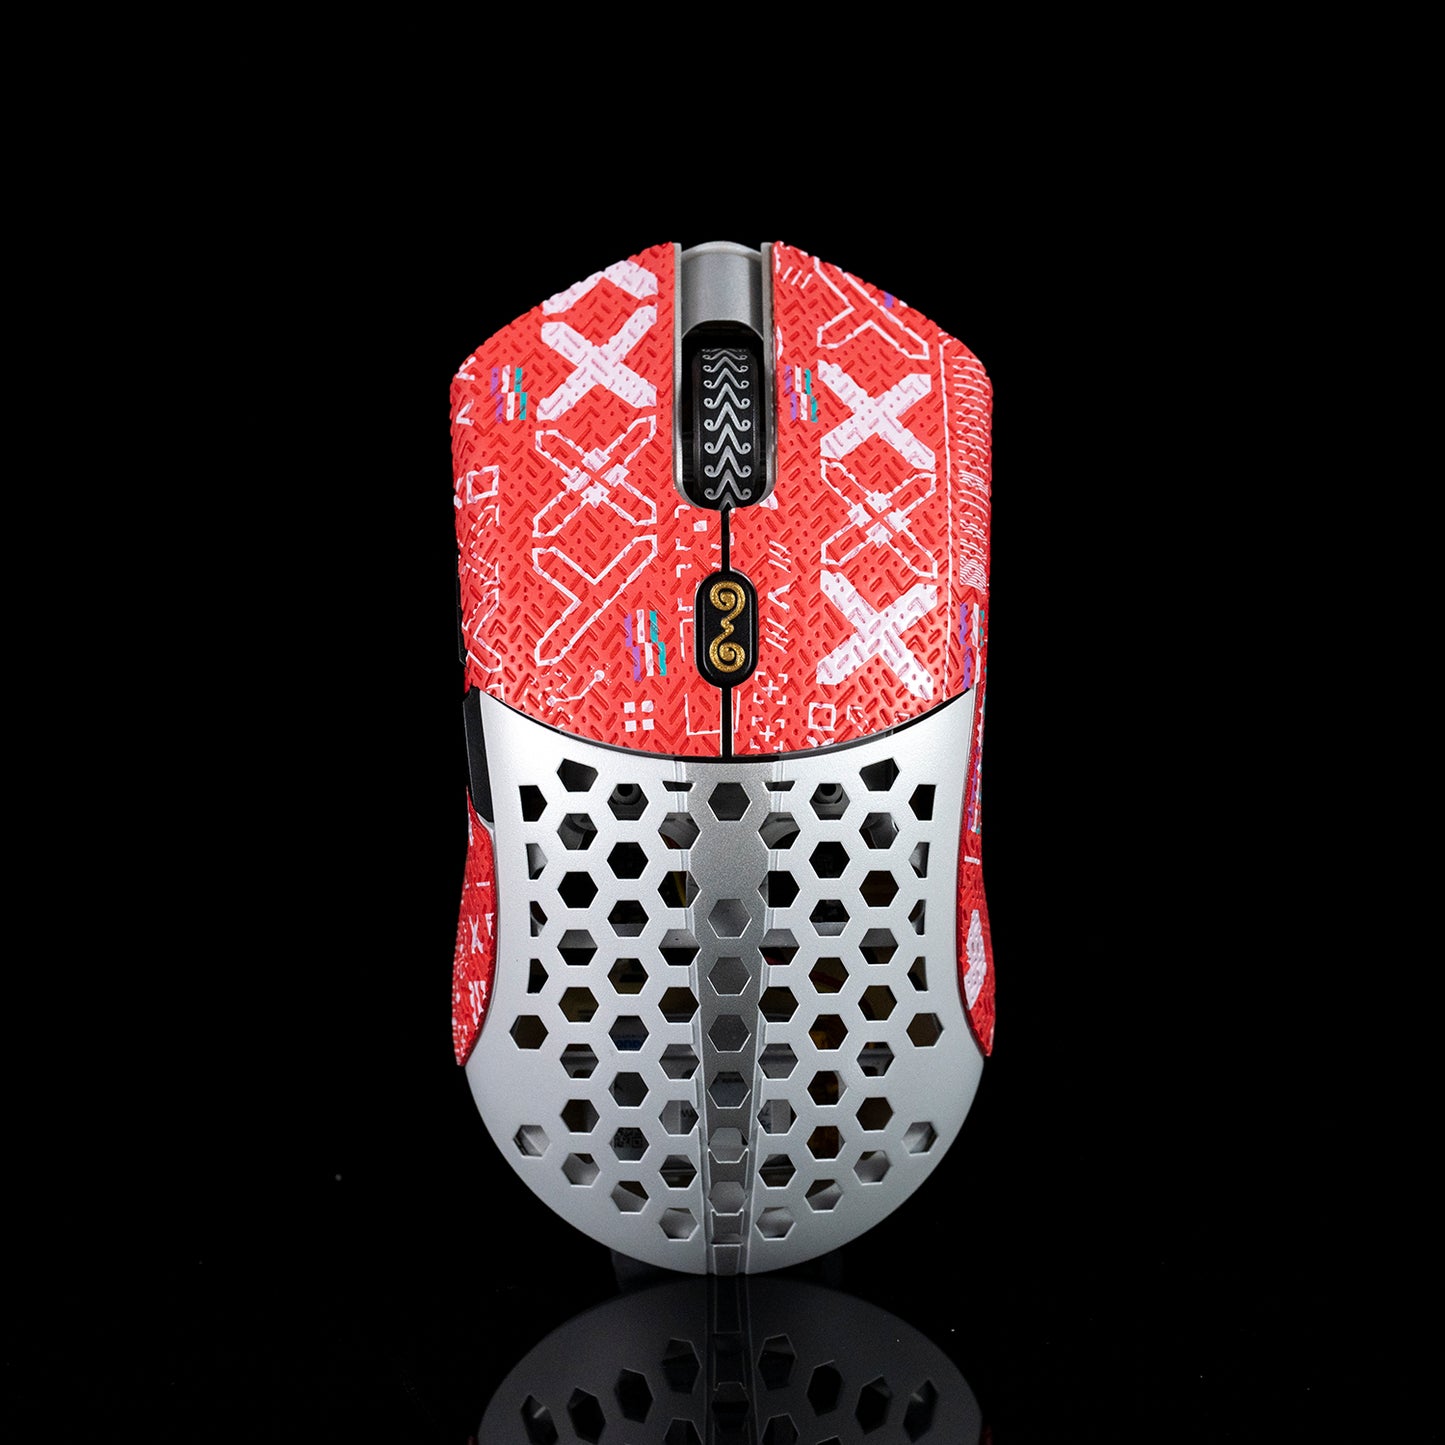 BTL Mouse Grip Tape for Finalmouse Starlight-12 Small / Ultralight 2 Capetown